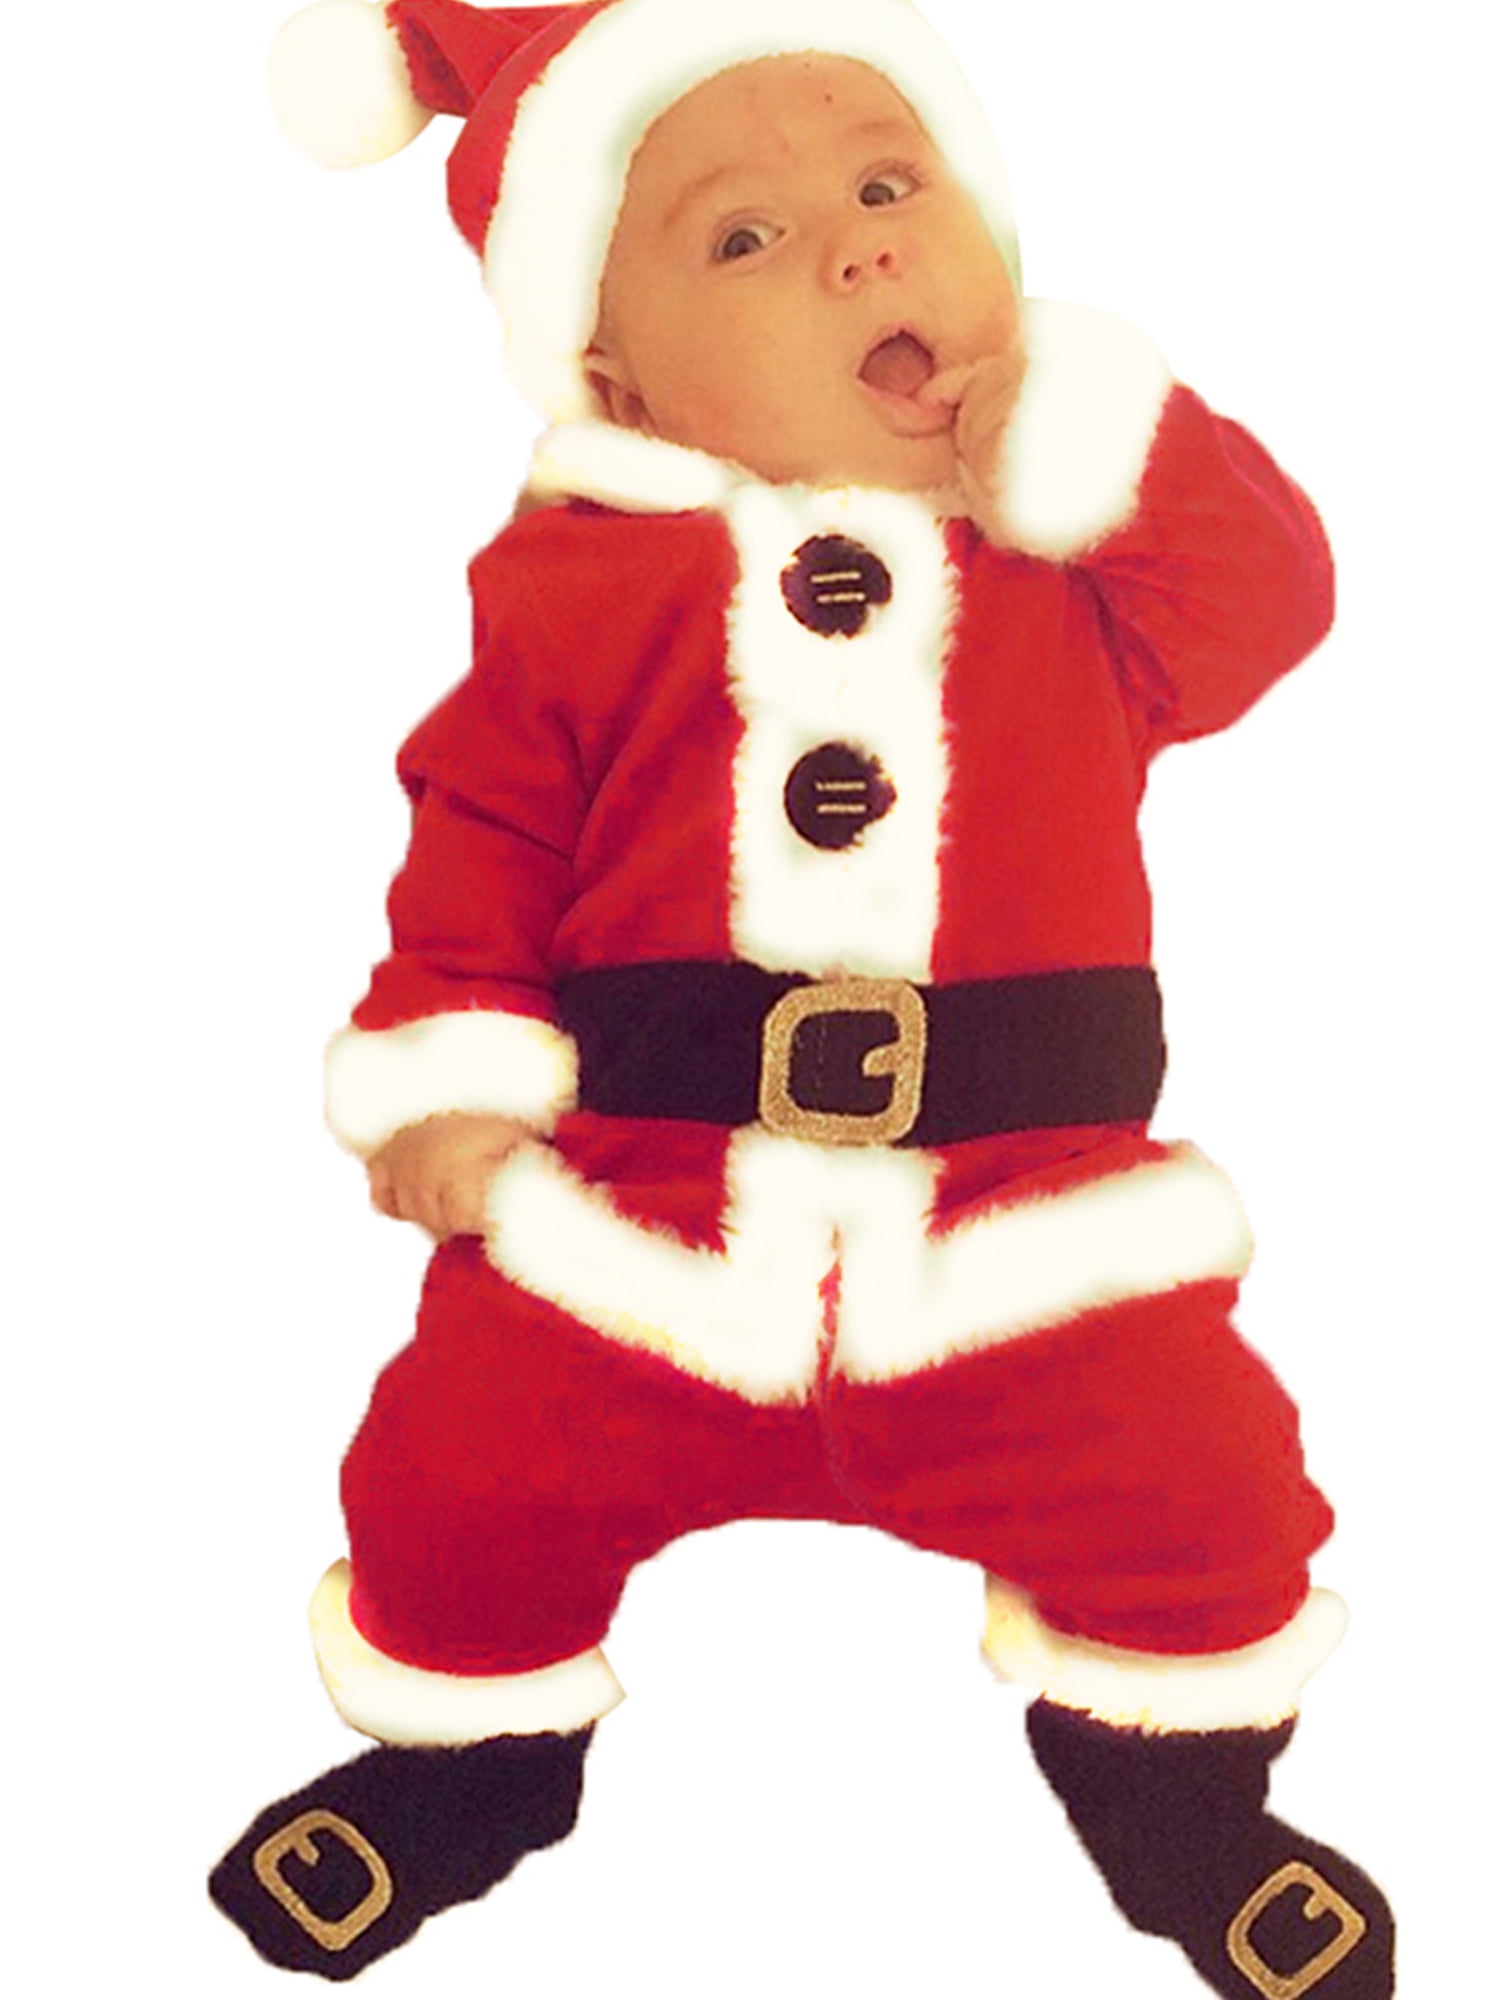 Baby Boys Girls Photography Costume Long Sleeve Romper Hat Santaa Bodysuit with Footies Xmas Fleece Jumpsuit Set Newborn Christmas Photo Props Outfit 